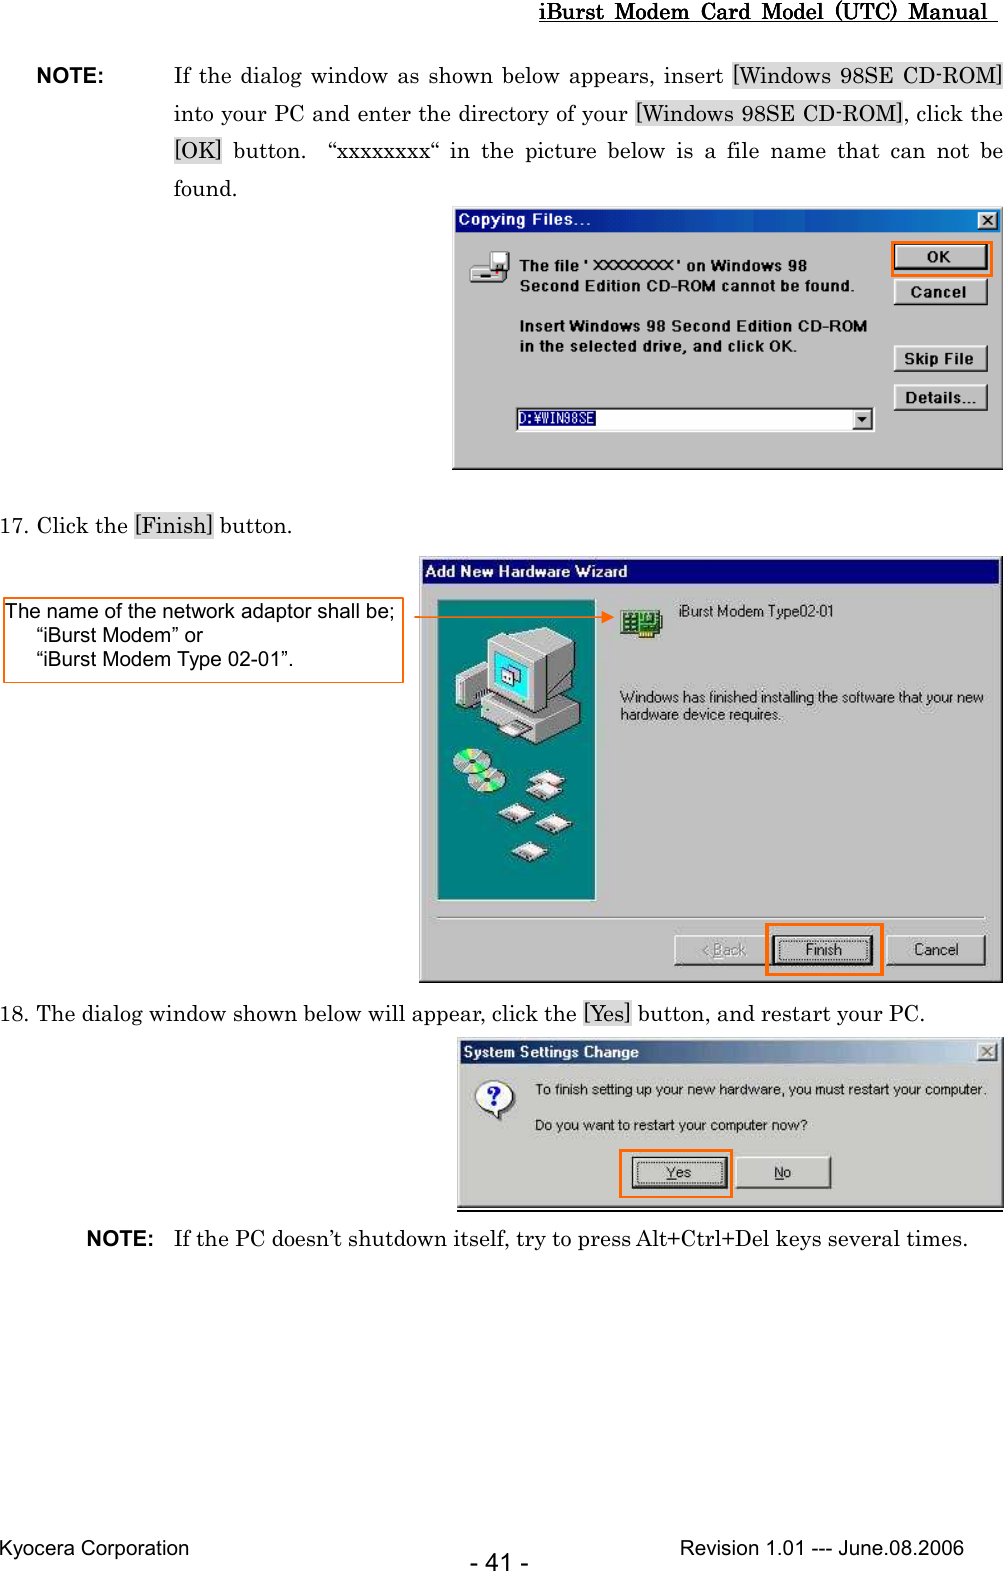 iBurst  Modem  Card  Model  (UTC)  Manual iBurst  Modem  Card  Model  (UTC)  Manual iBurst  Modem  Card  Model  (UTC)  Manual iBurst  Modem  Card  Model  (UTC)  Manual       Kyocera Corporation                                                                                              Revision 1.01 --- June.08.2006 - 41 - NOTE:  If the dialog window as shown  below appears, insert [Windows 98SE CD-ROM] into your PC and enter the directory of your [Windows 98SE CD-ROM], click the [OK]  button.    “xxxxxxxx“  in  the  picture  below  is  a  file  name  that  can  not  be found.   17. Click the [Finish] button.  18. The dialog window shown below will appear, click the [Yes] button, and restart your PC.  NOTE:  If the PC doesn’t shutdown itself, try to press Alt+Ctrl+Del keys several times. The name of the network adaptor shall be;     “iBurst Modem” or     “iBurst Modem Type 02-01”. 